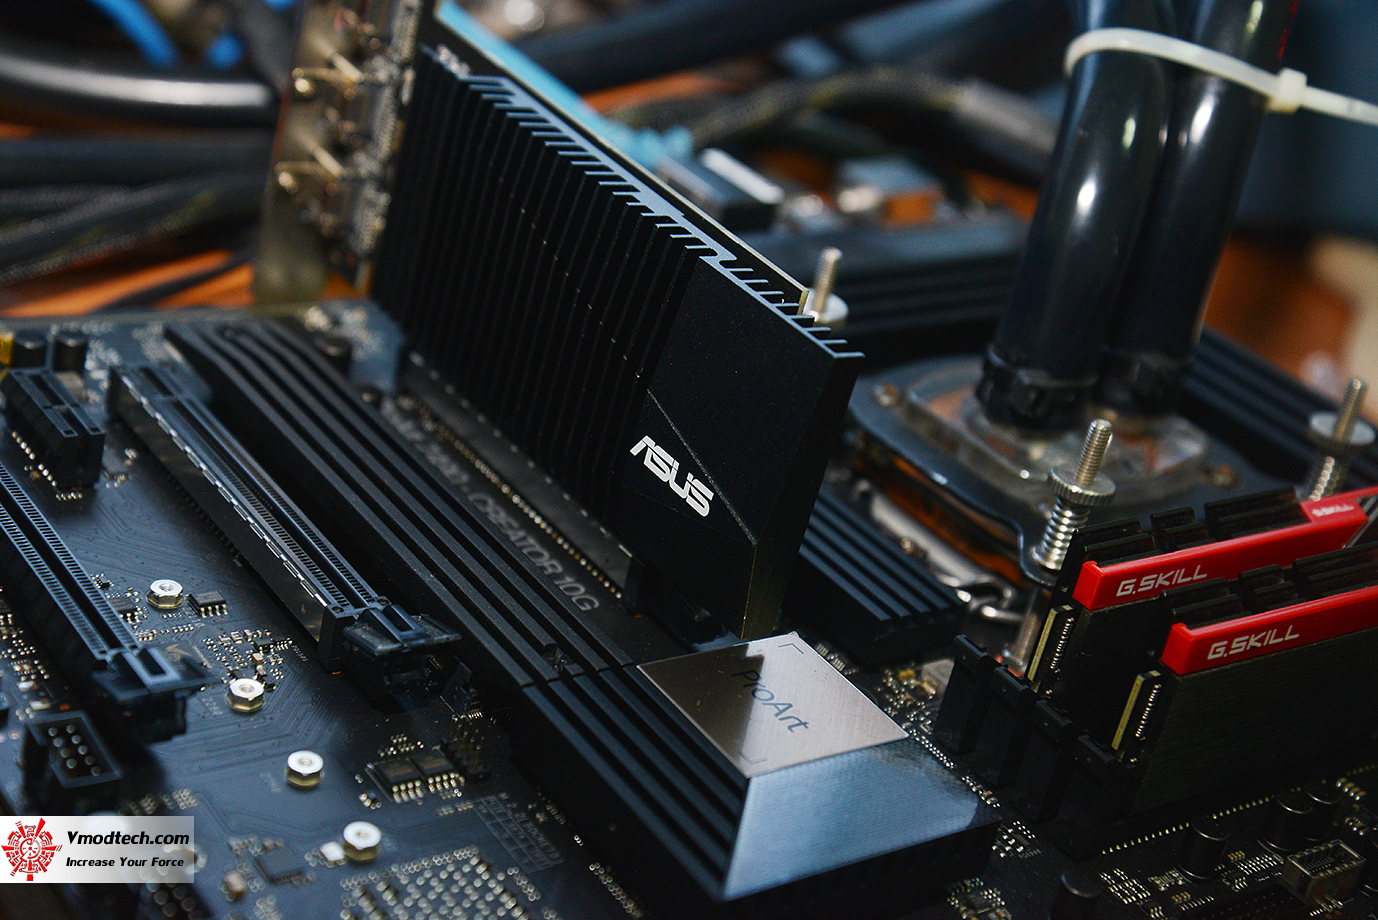 dsc 6402 ASUS GeForce GT 710 with 4 HDMI ports Review